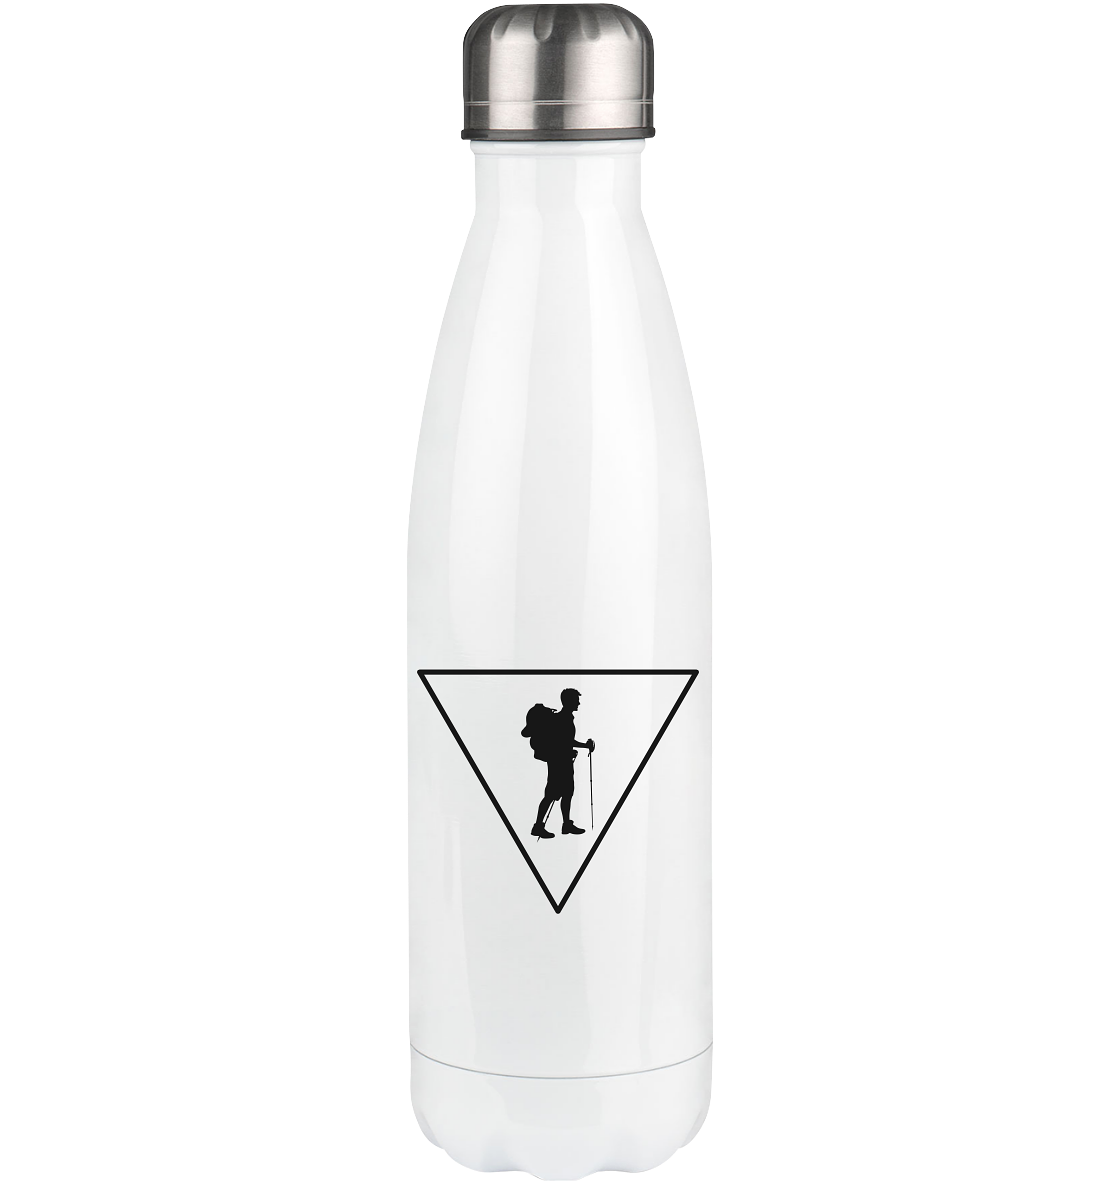 Triangle and Hiking - Edelstahl Thermosflasche wandern 500ml